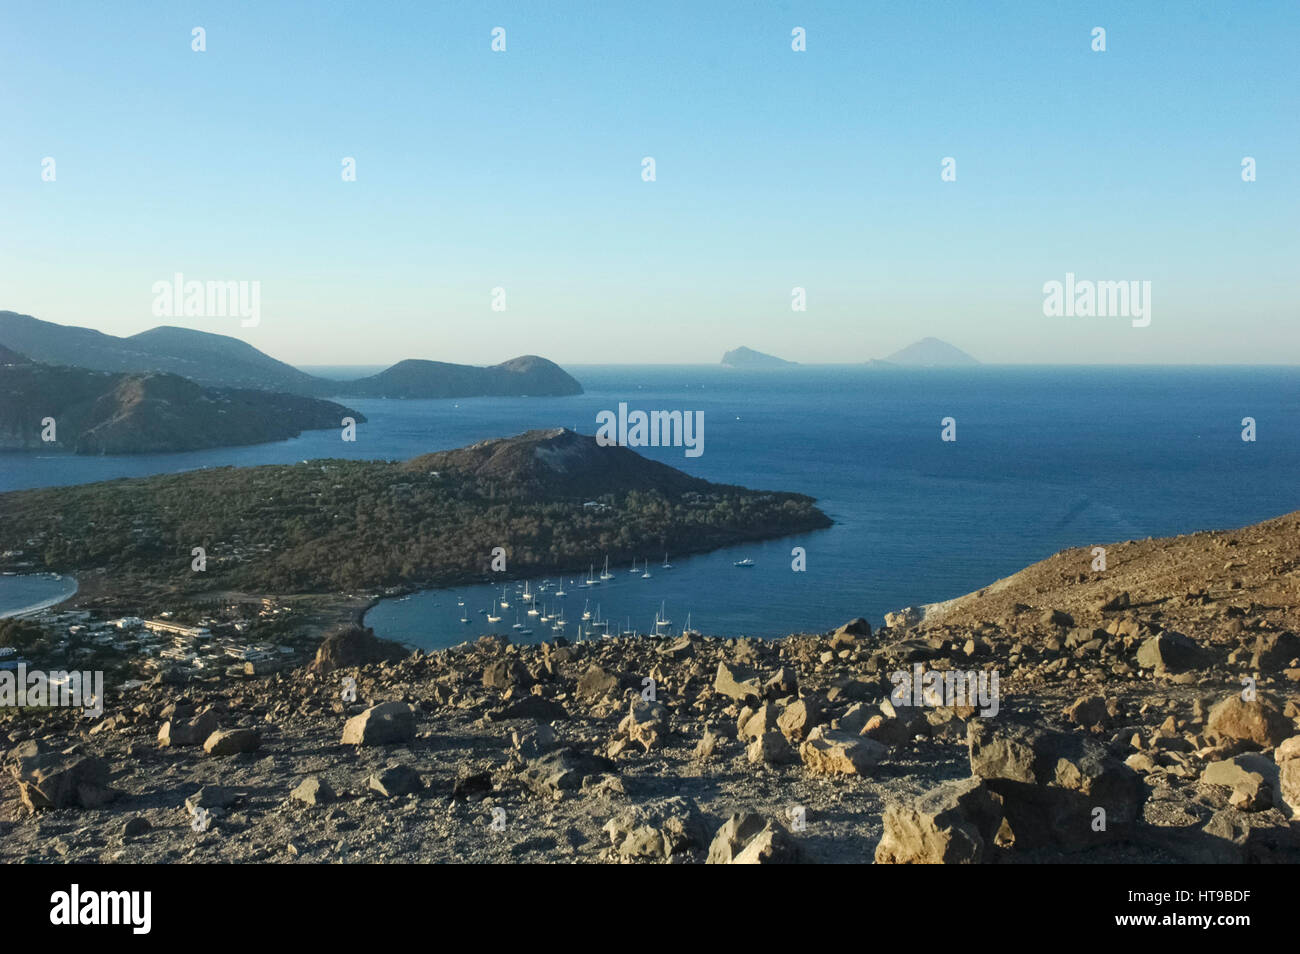 View of the amazing scenery of the Aeolian Islands Stock Photo